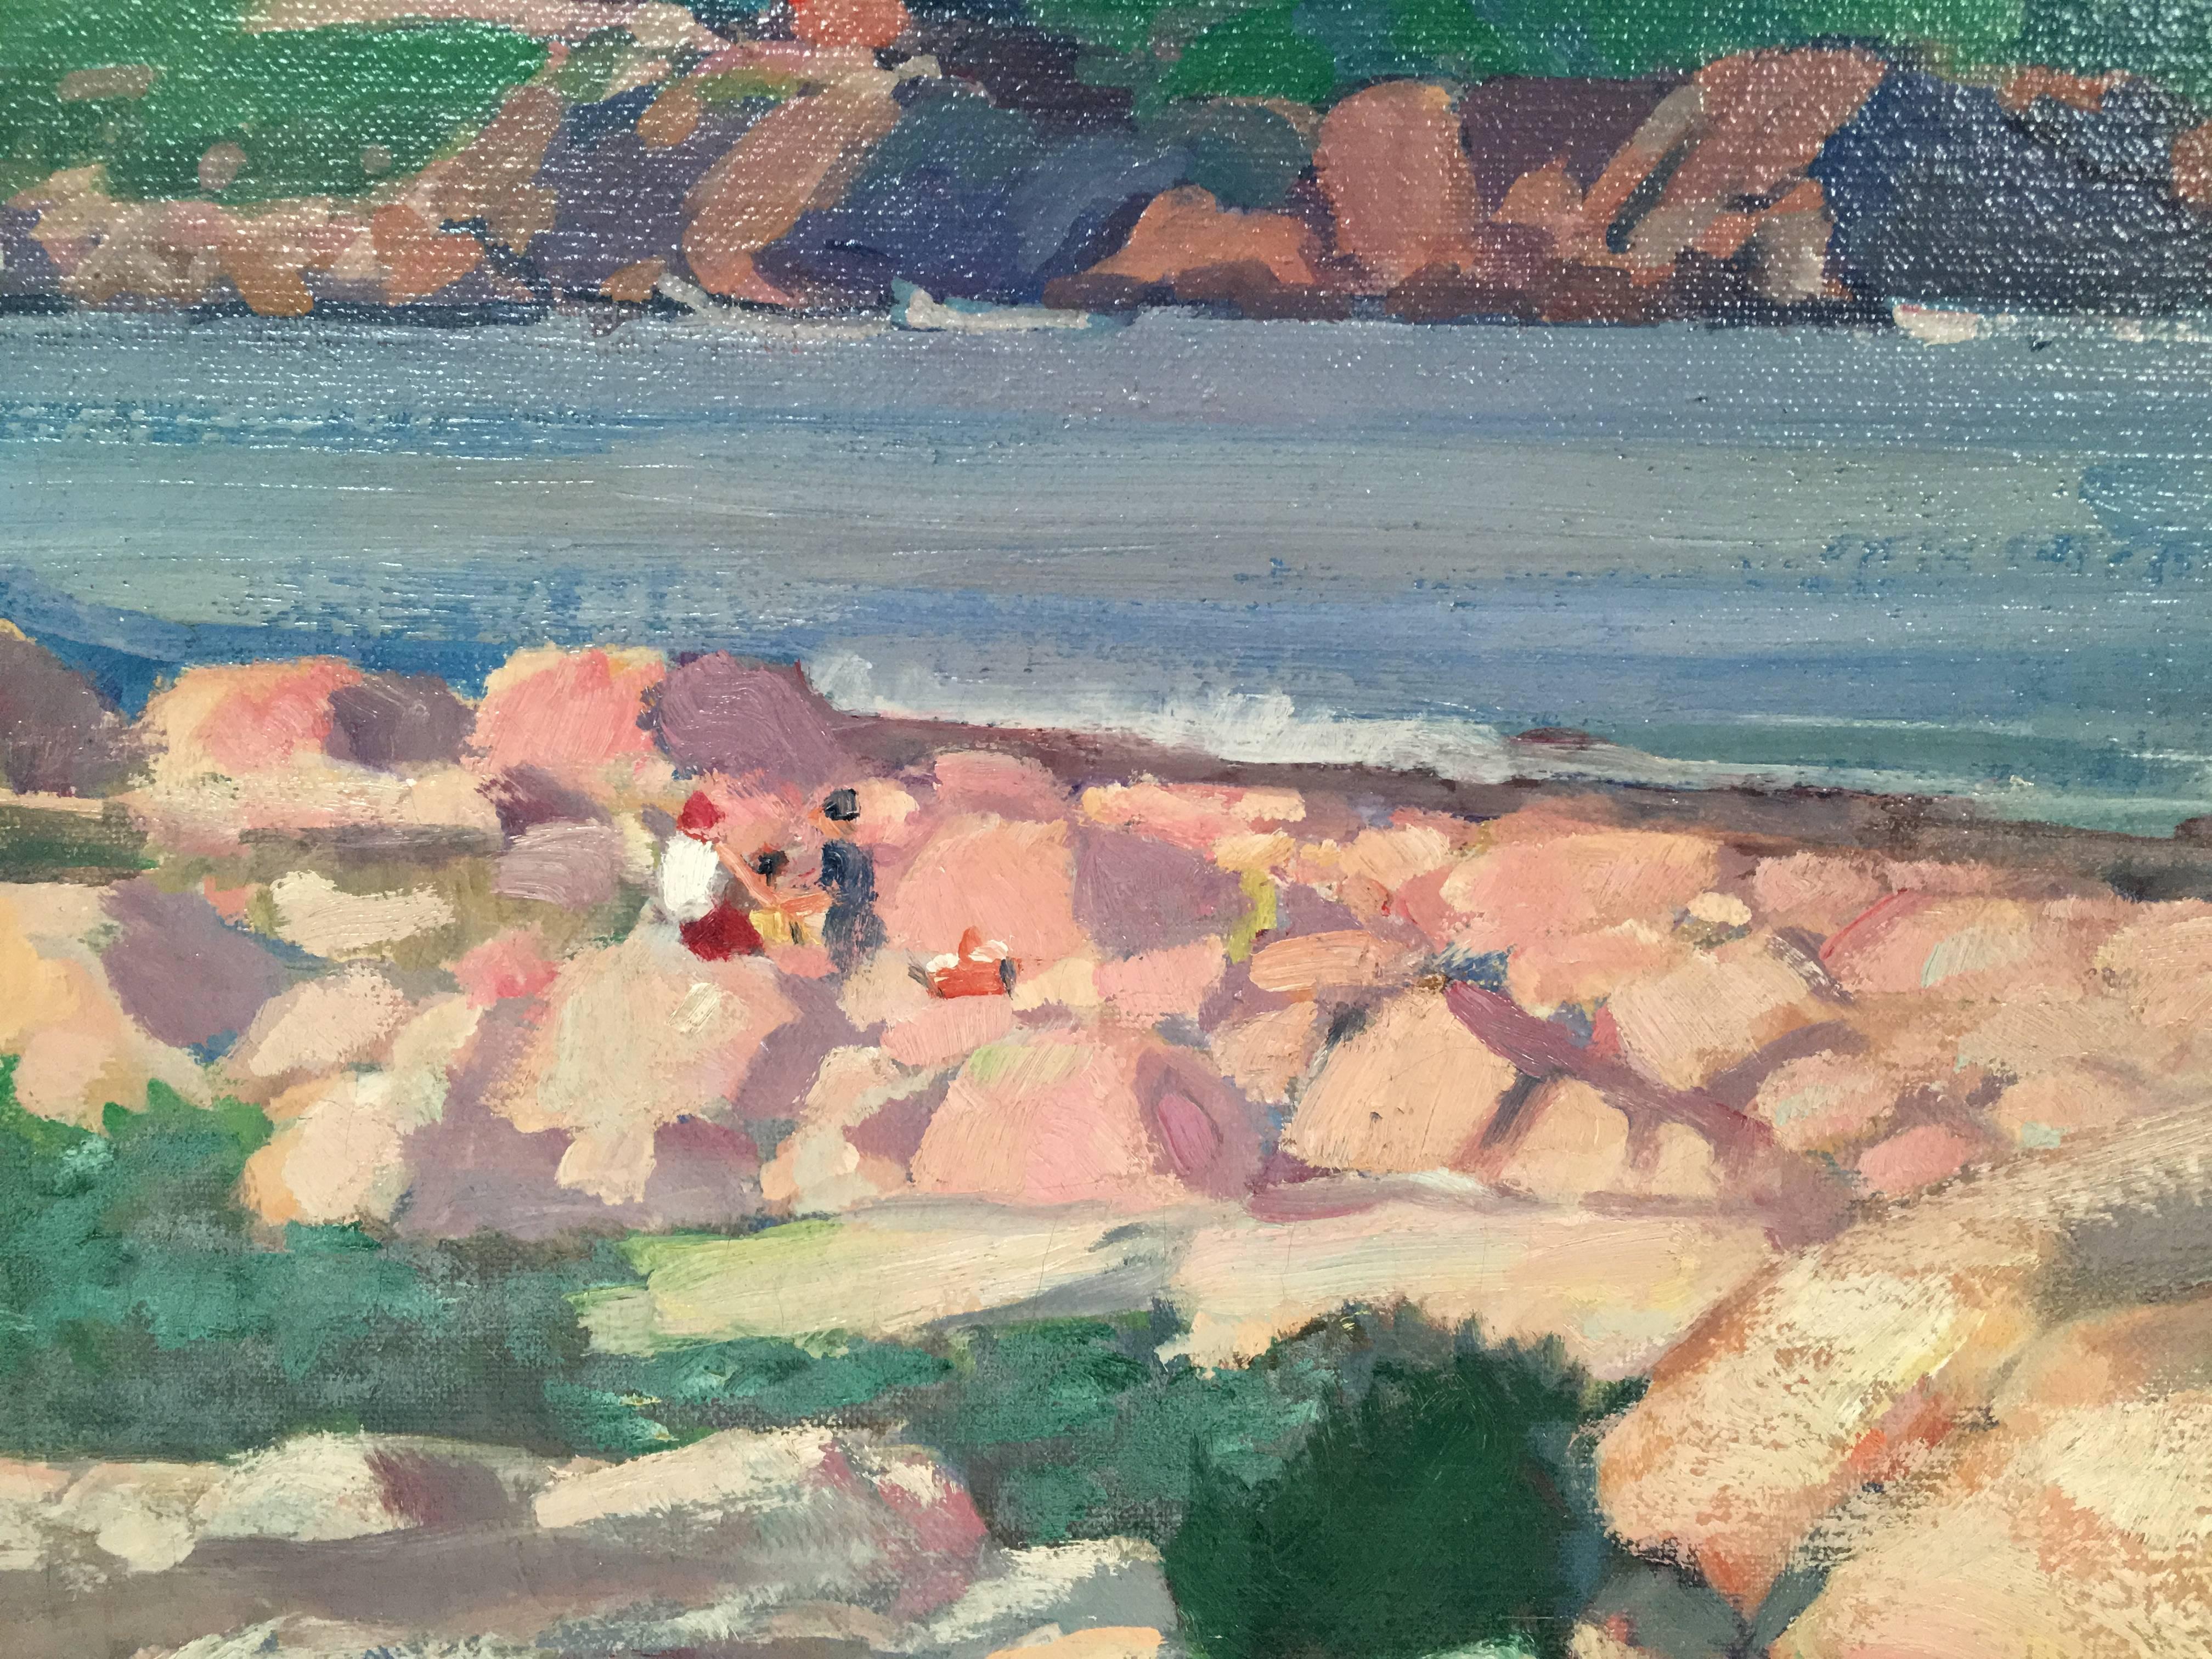 An oil on canvas painting by Donald Blagge Barton (1903-1990) depicting the rocky coast of Gloucester, Massachusetts, likely the area known as Bass Rocks, on a sunny day, with waves gently crashing and picnickers on the rocks, enjoying the view.